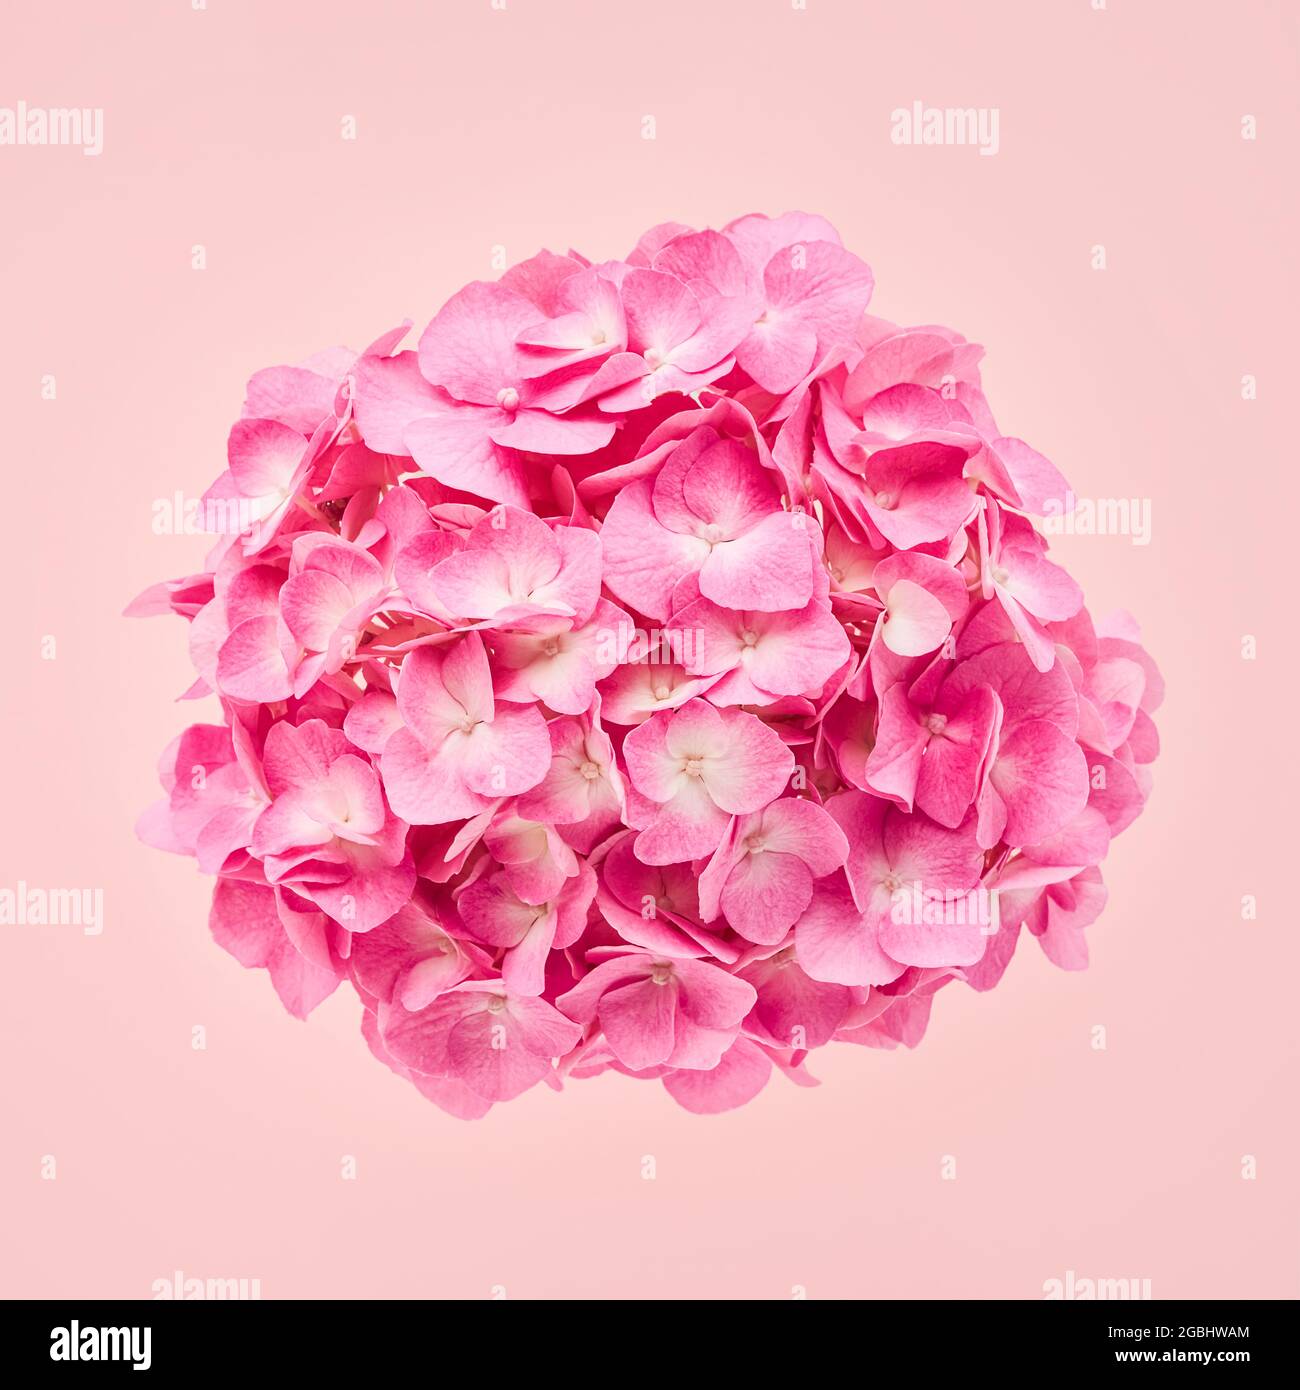 Pink hortensia or hydrangea flower on a pink background. Mothers Day, Valentine's Day, bachelorette, summer concept. Copy space, top view. Stock Photo